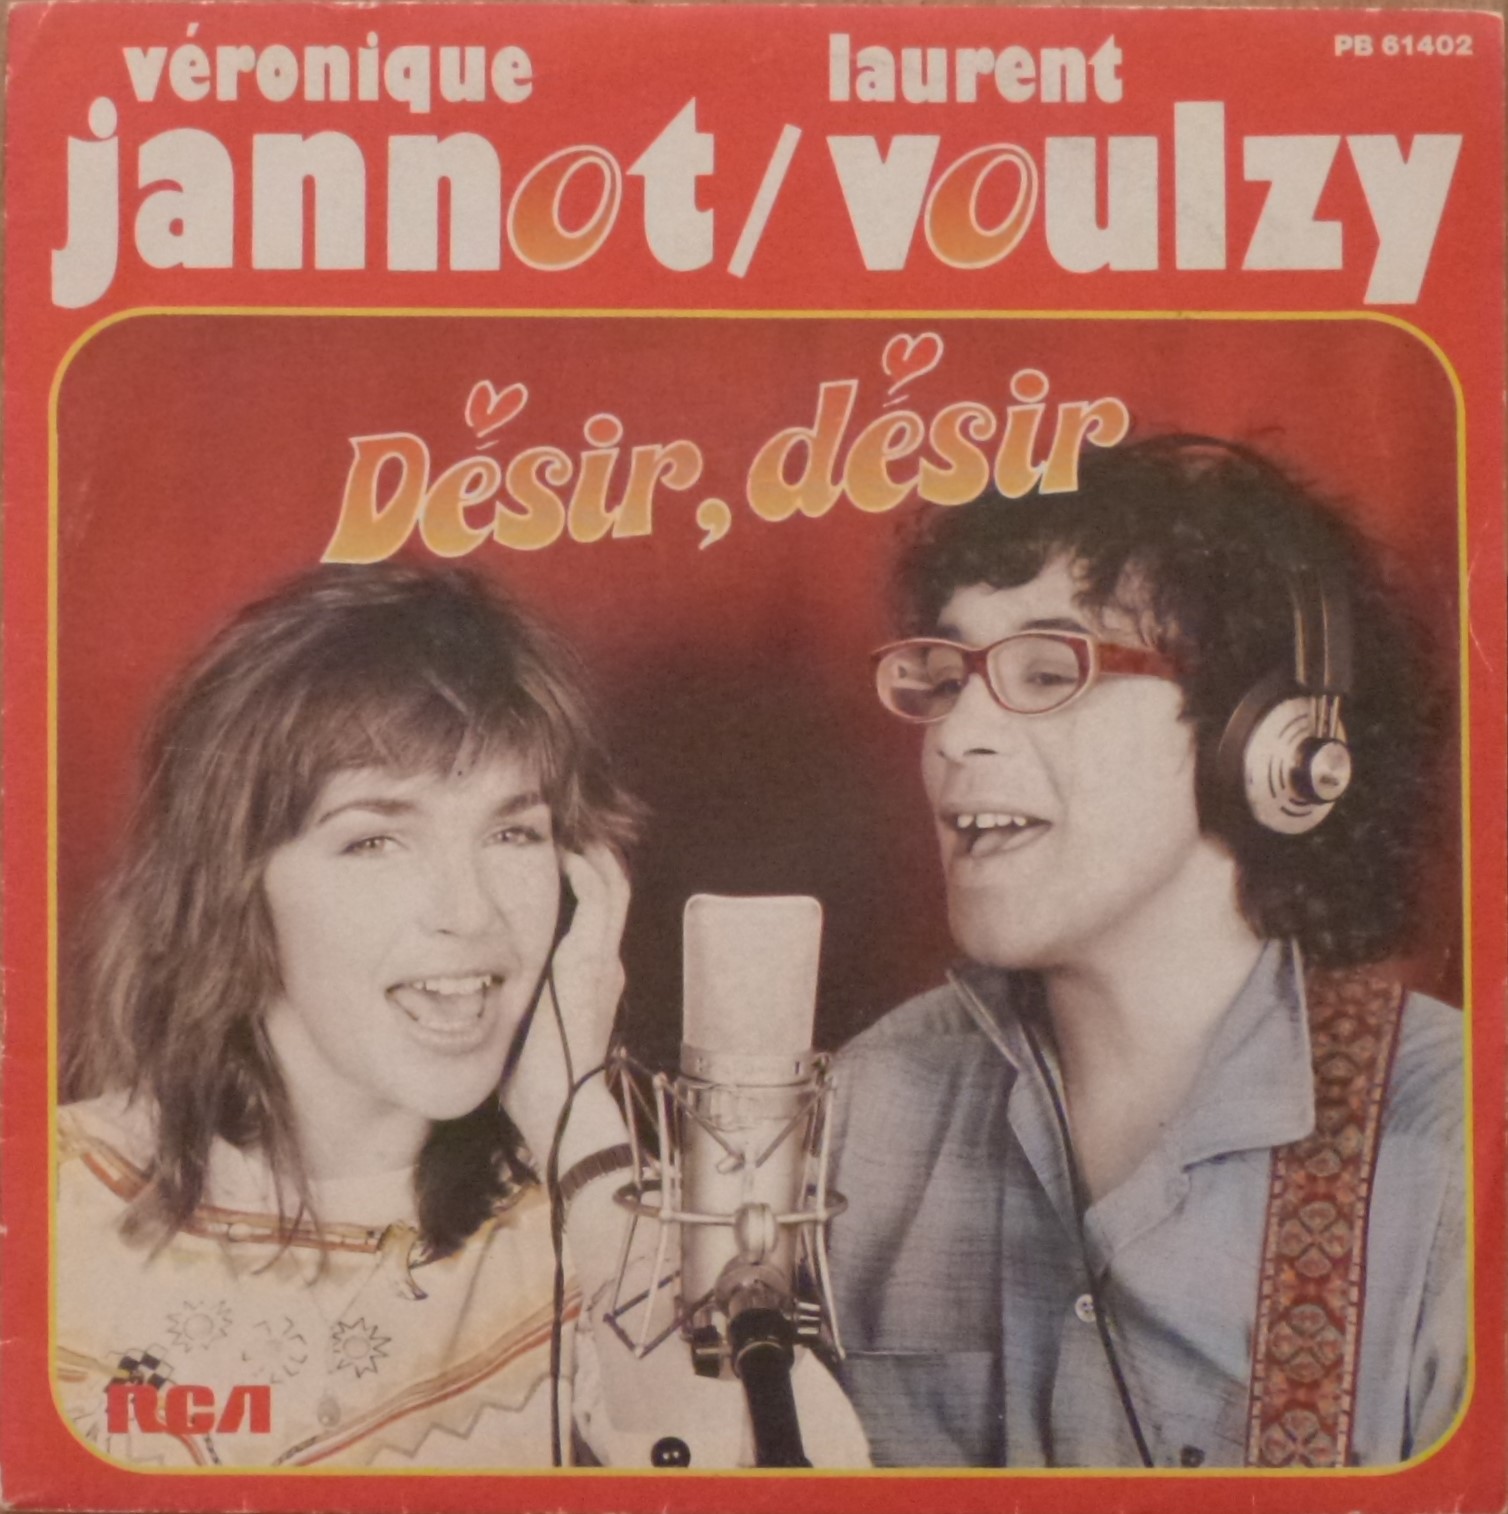 Jannot Voulzy